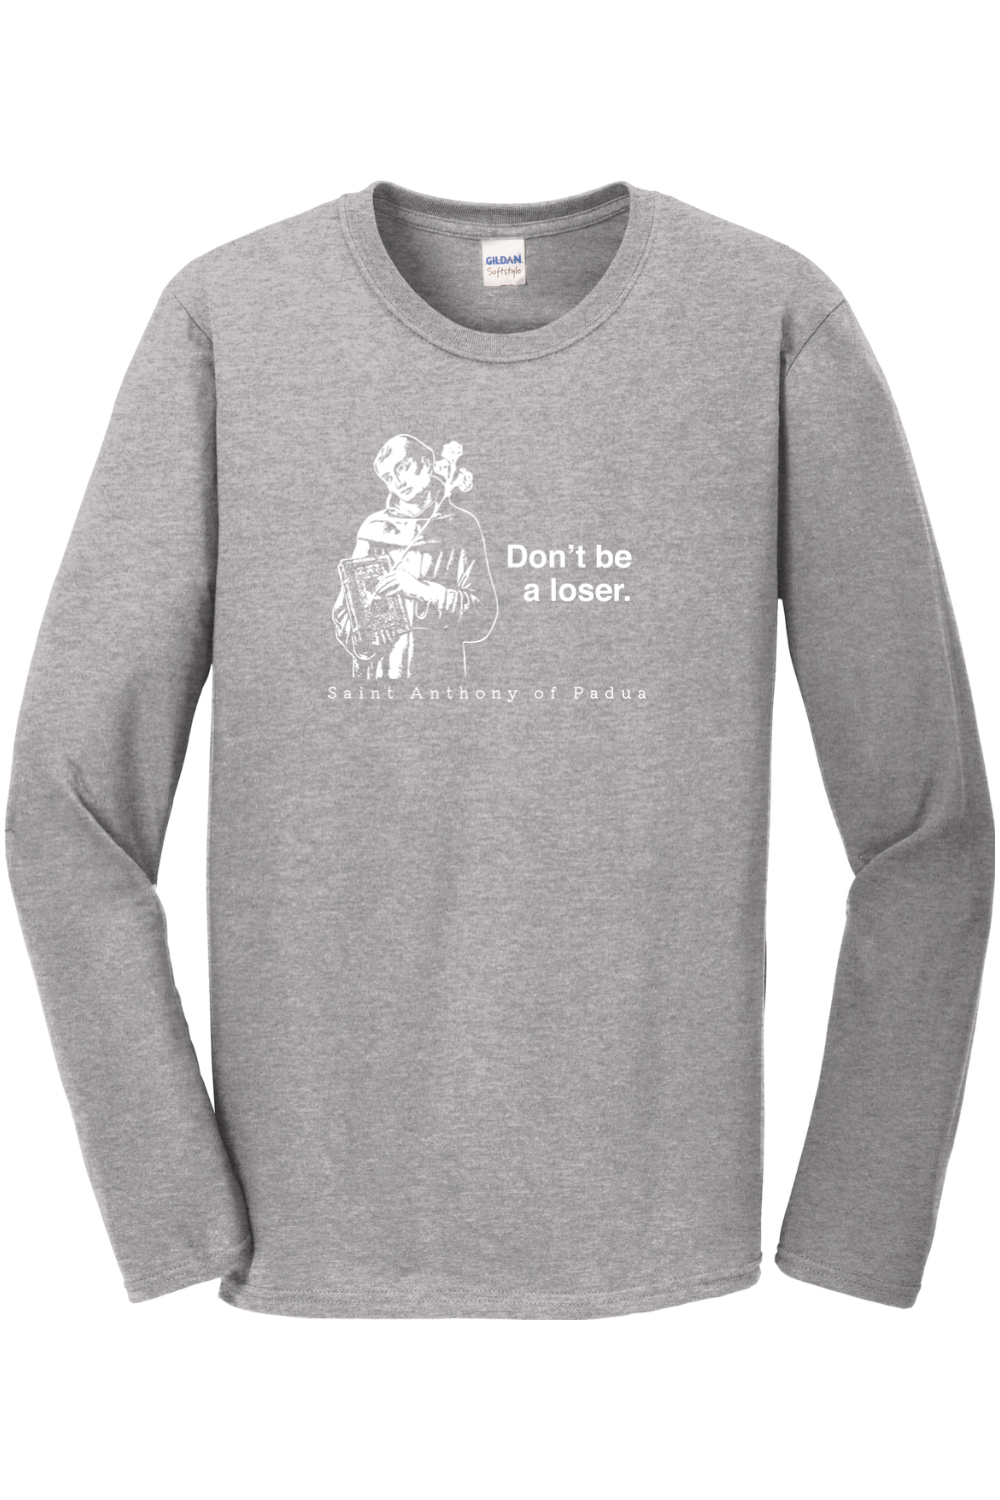 Don't Be a Loser - St Anthony of Padua Long Sleeve